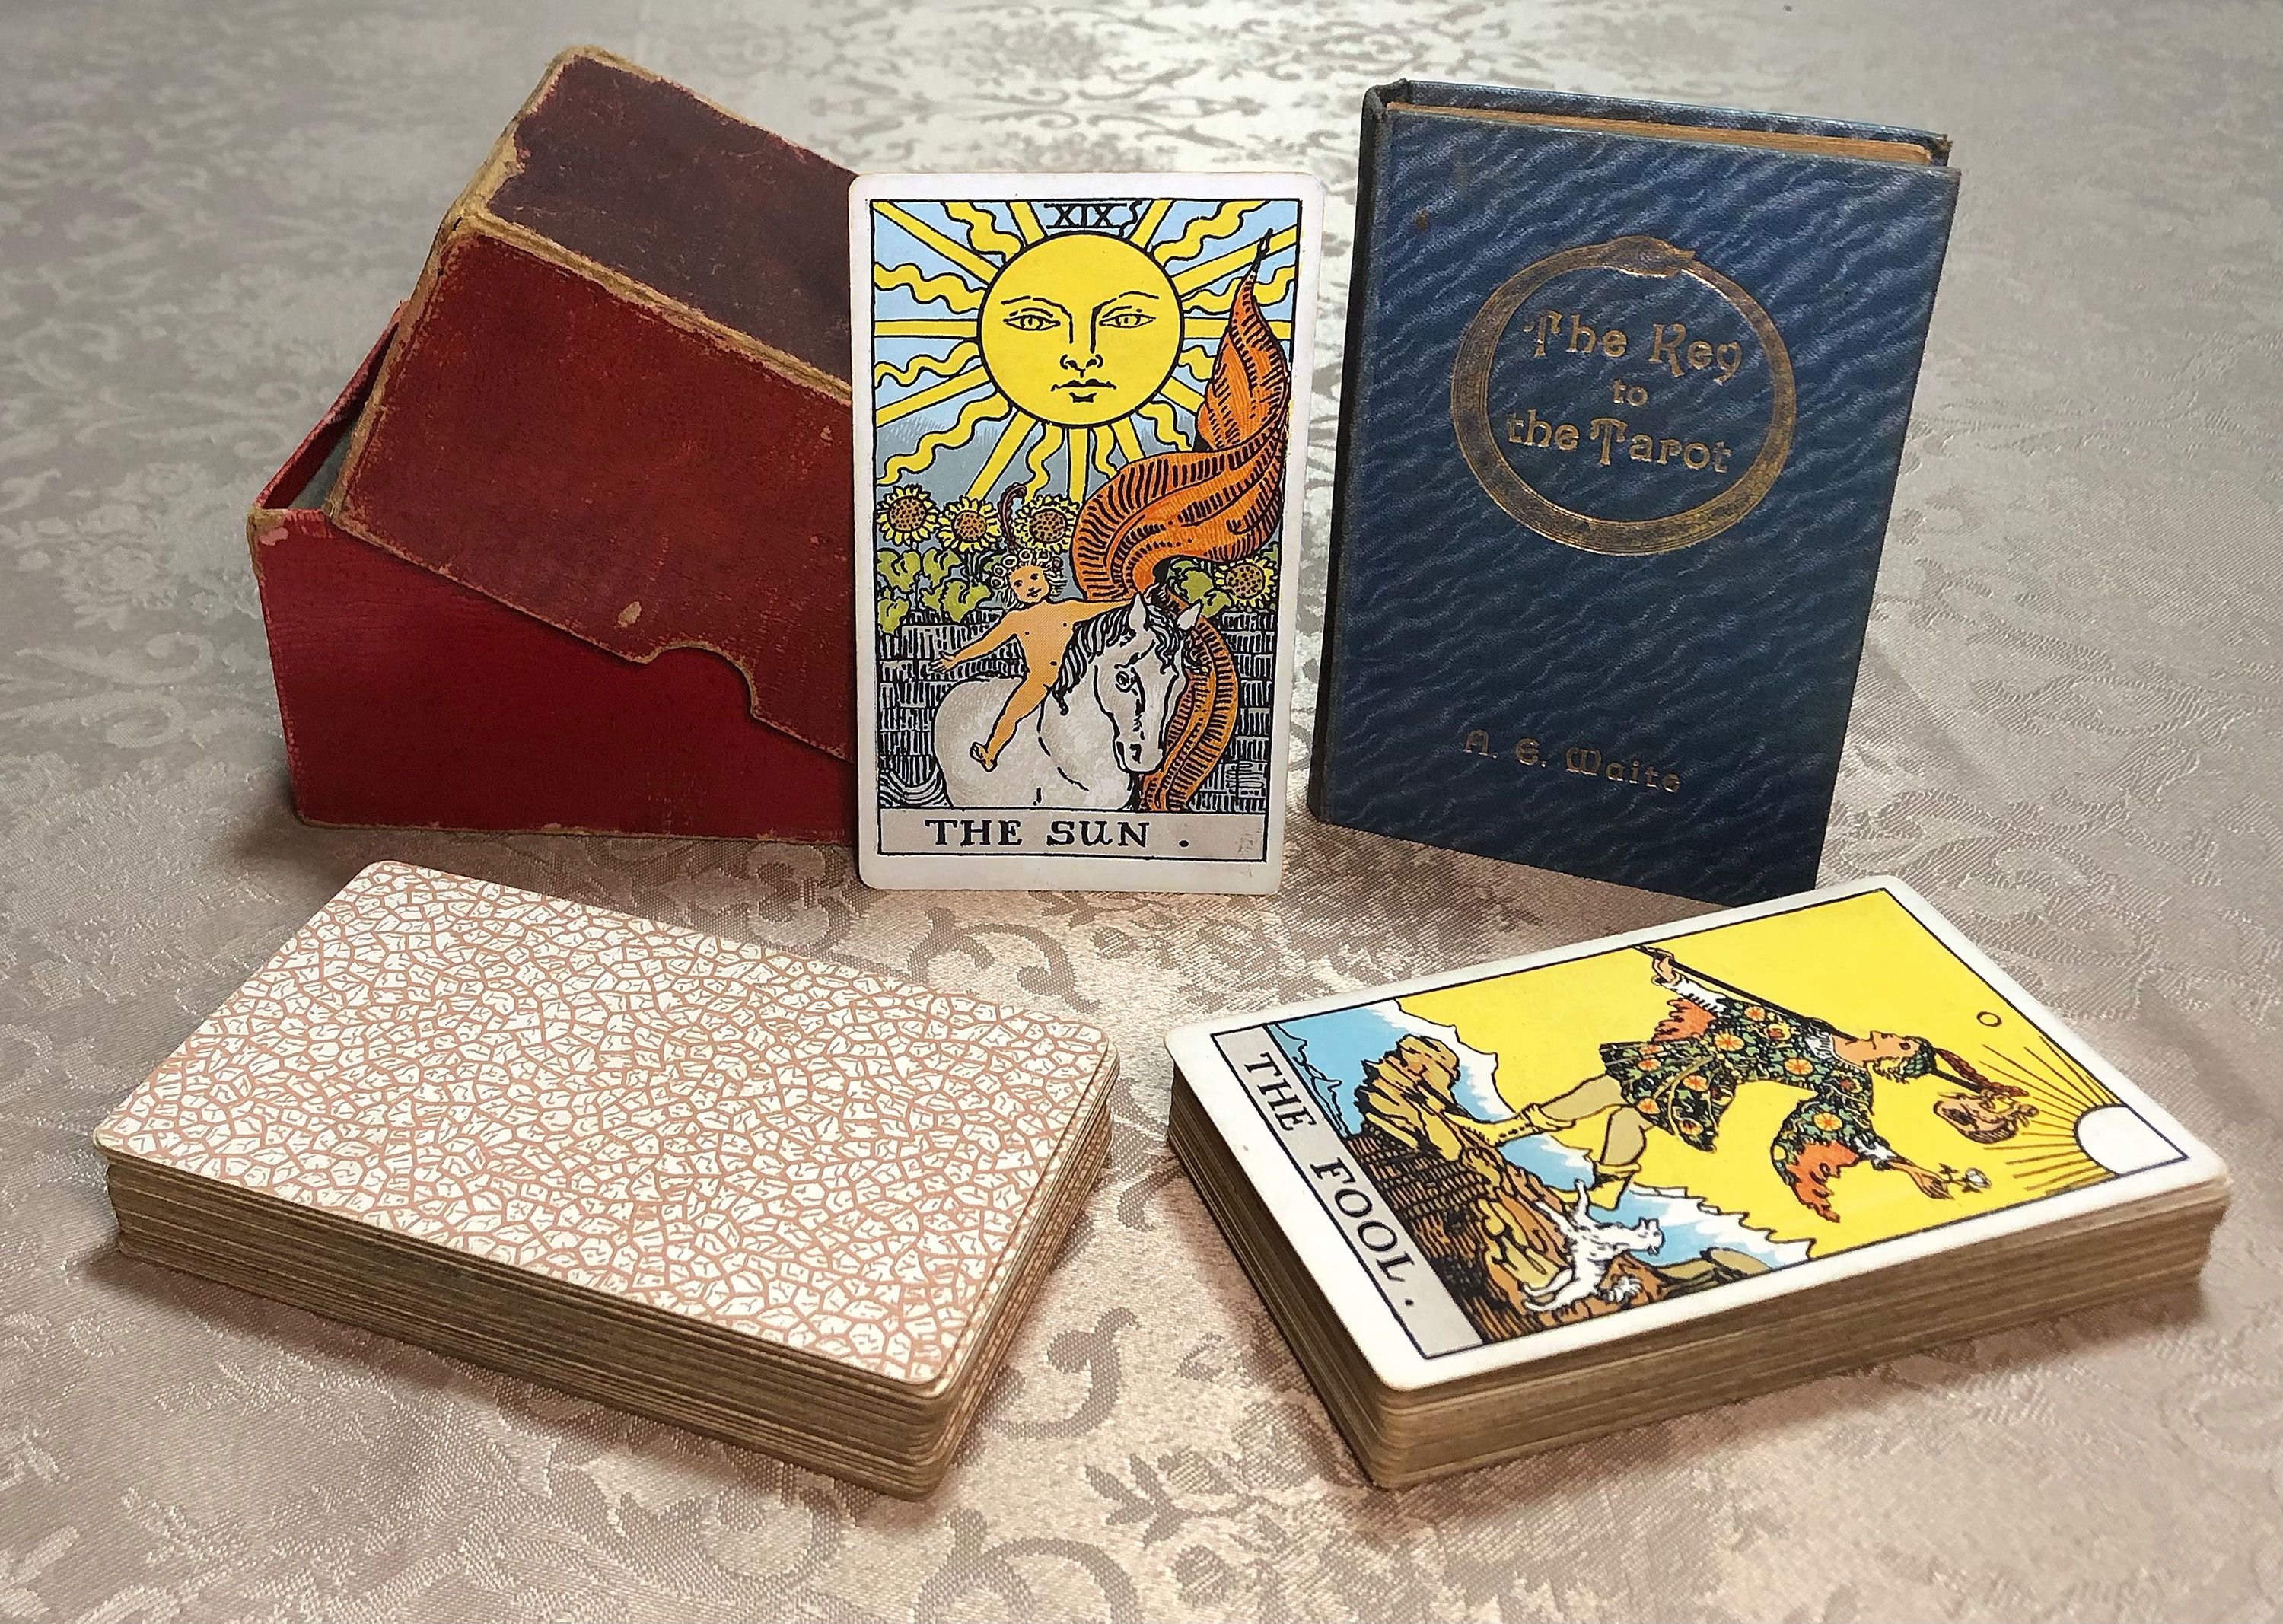 A preliminary edition of the Waite-Smith tarot cards dating to 1909.